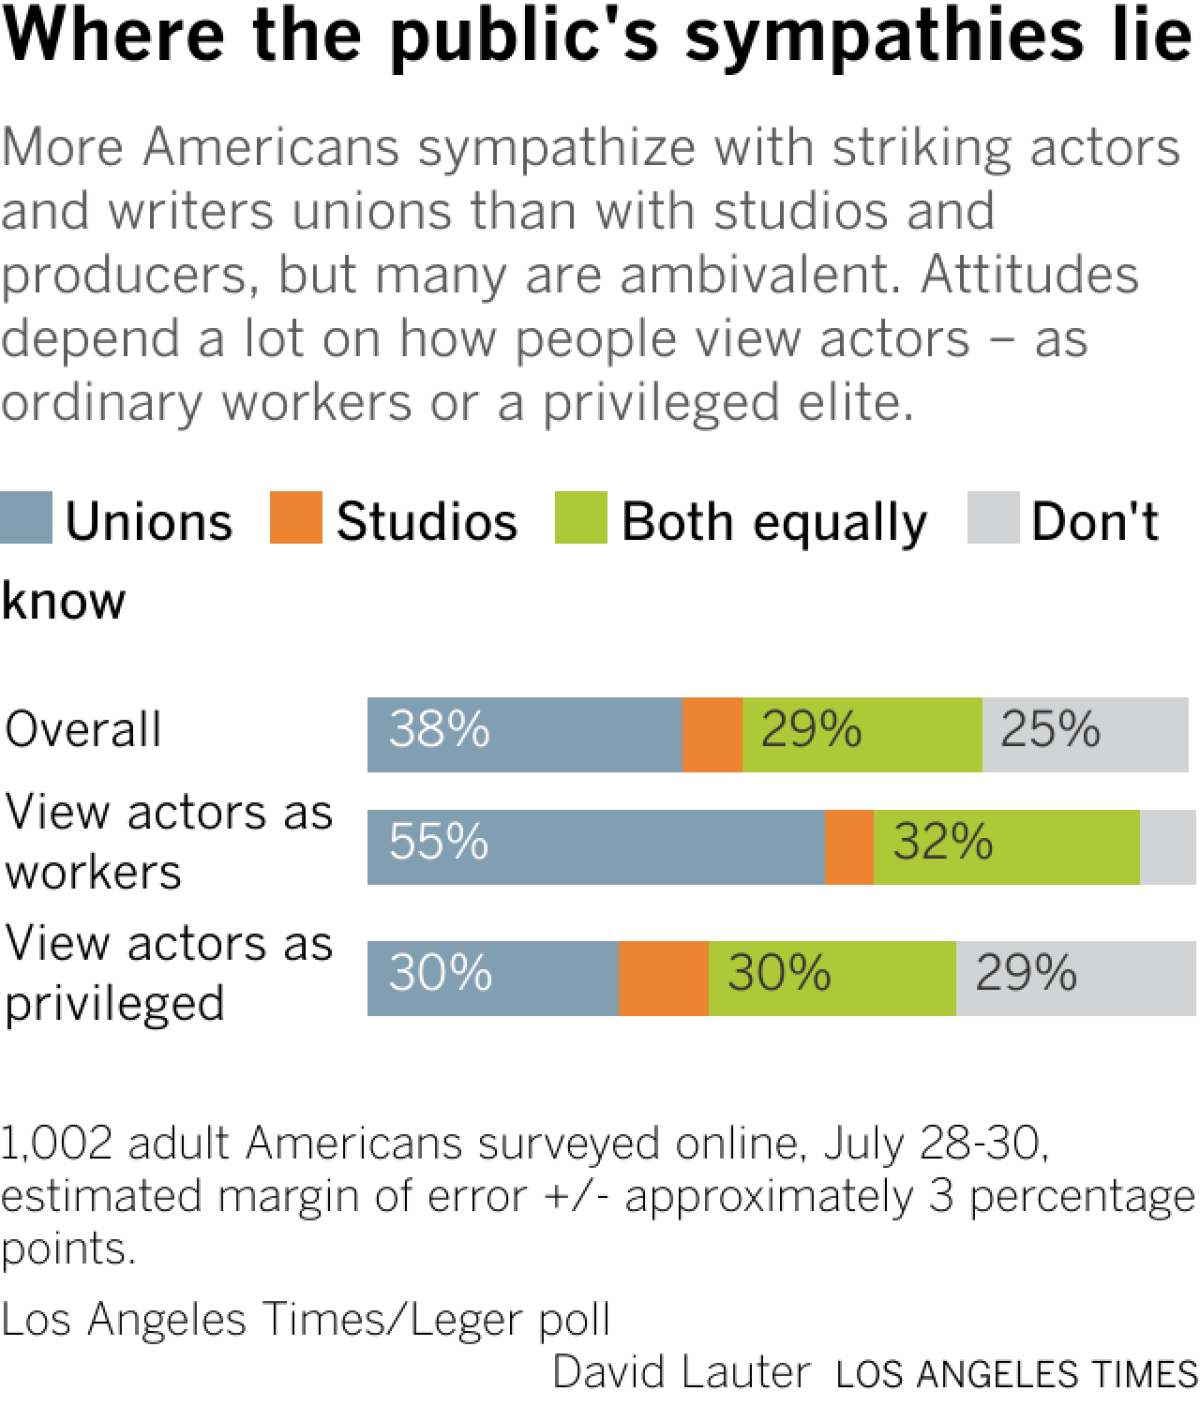 More Americans sympathize with striking actors and writers unions than with studios and producers.